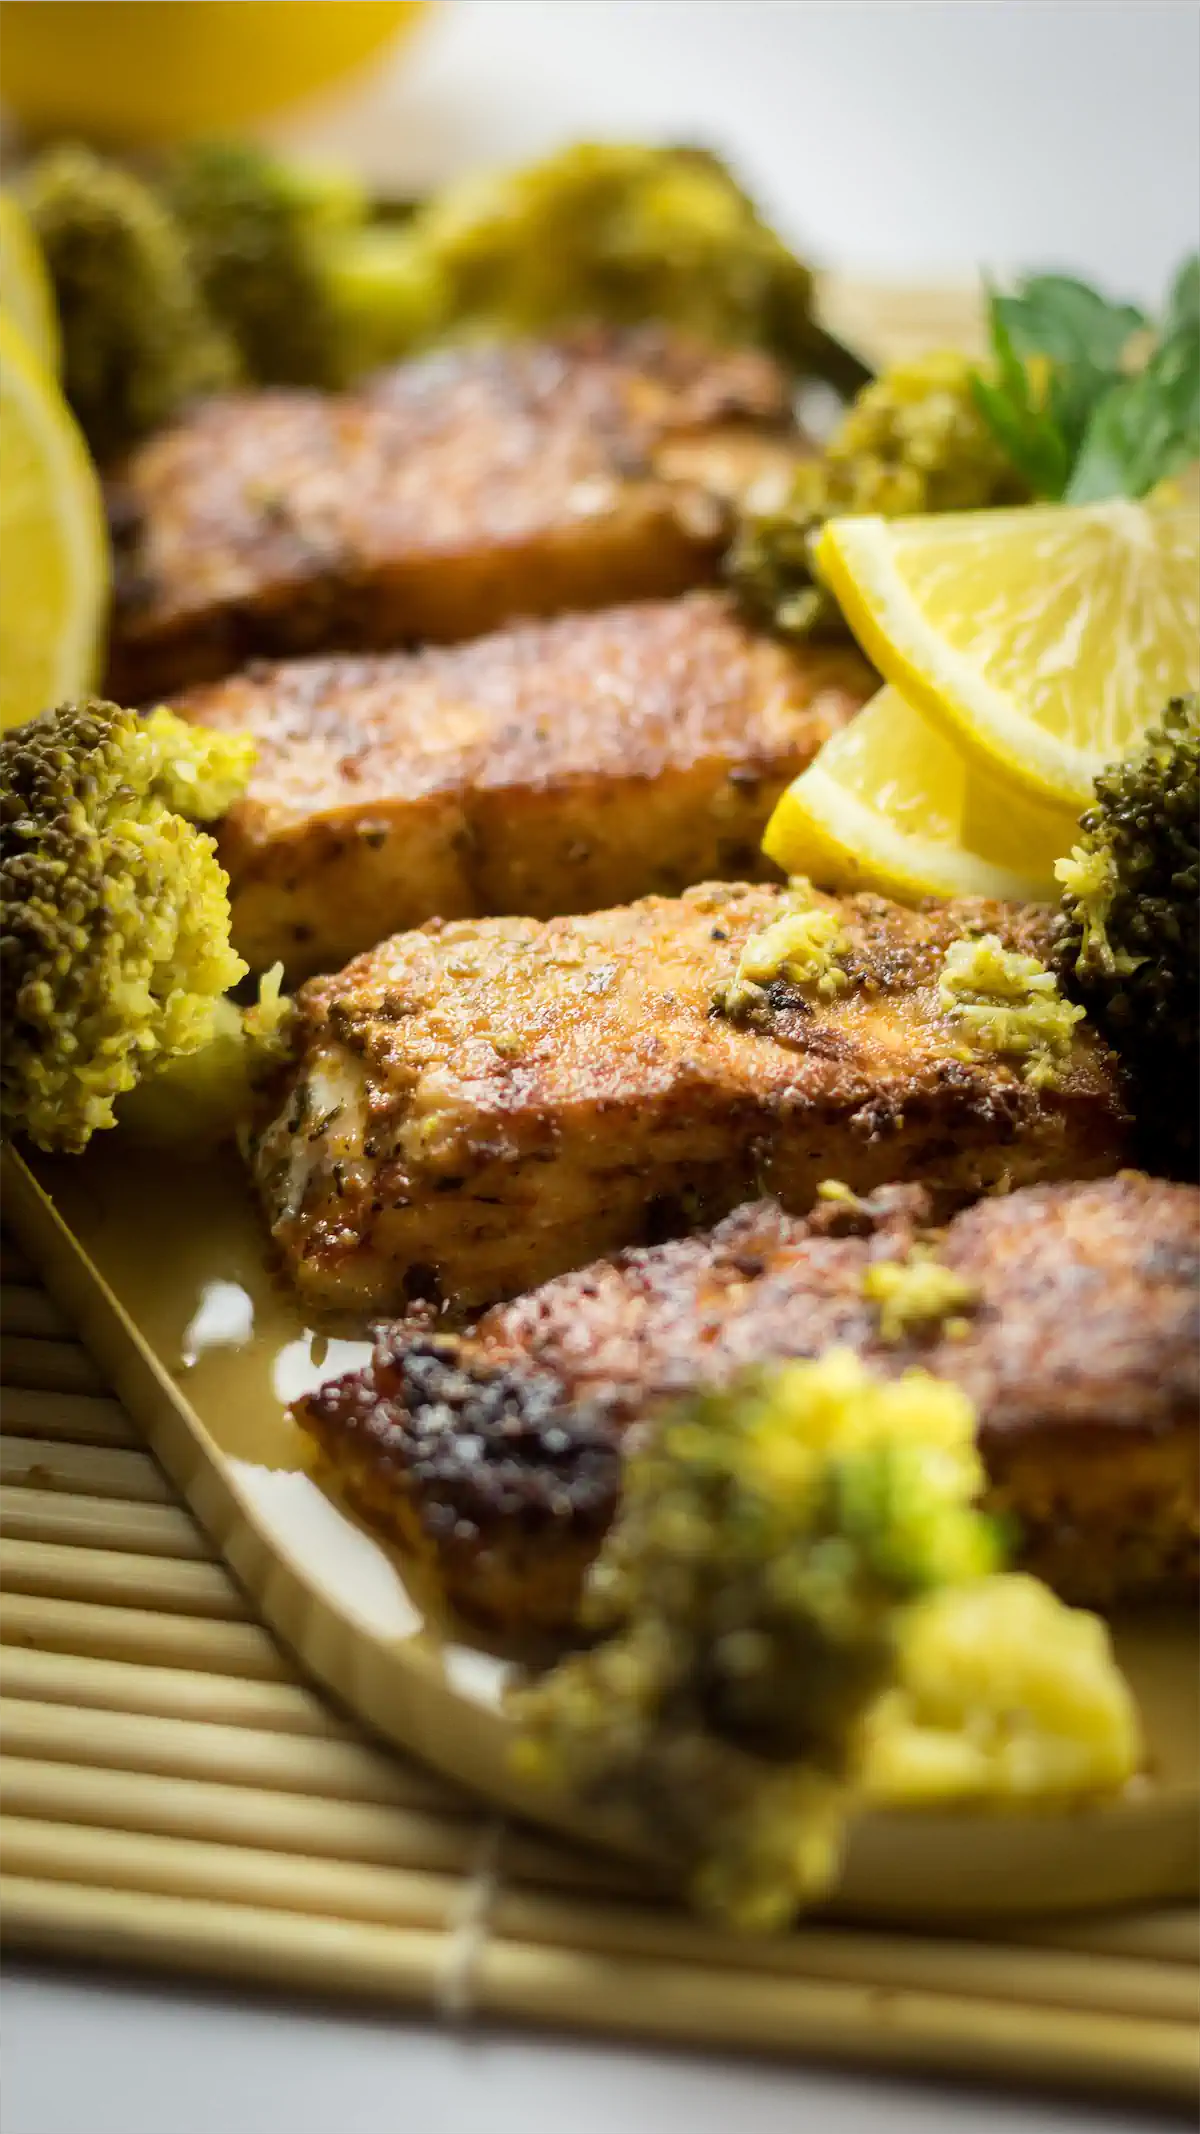 Pan-seared salmon seasoned with blackened spices, drizzled with a lemony butter sauce, and served alongside broccoli.